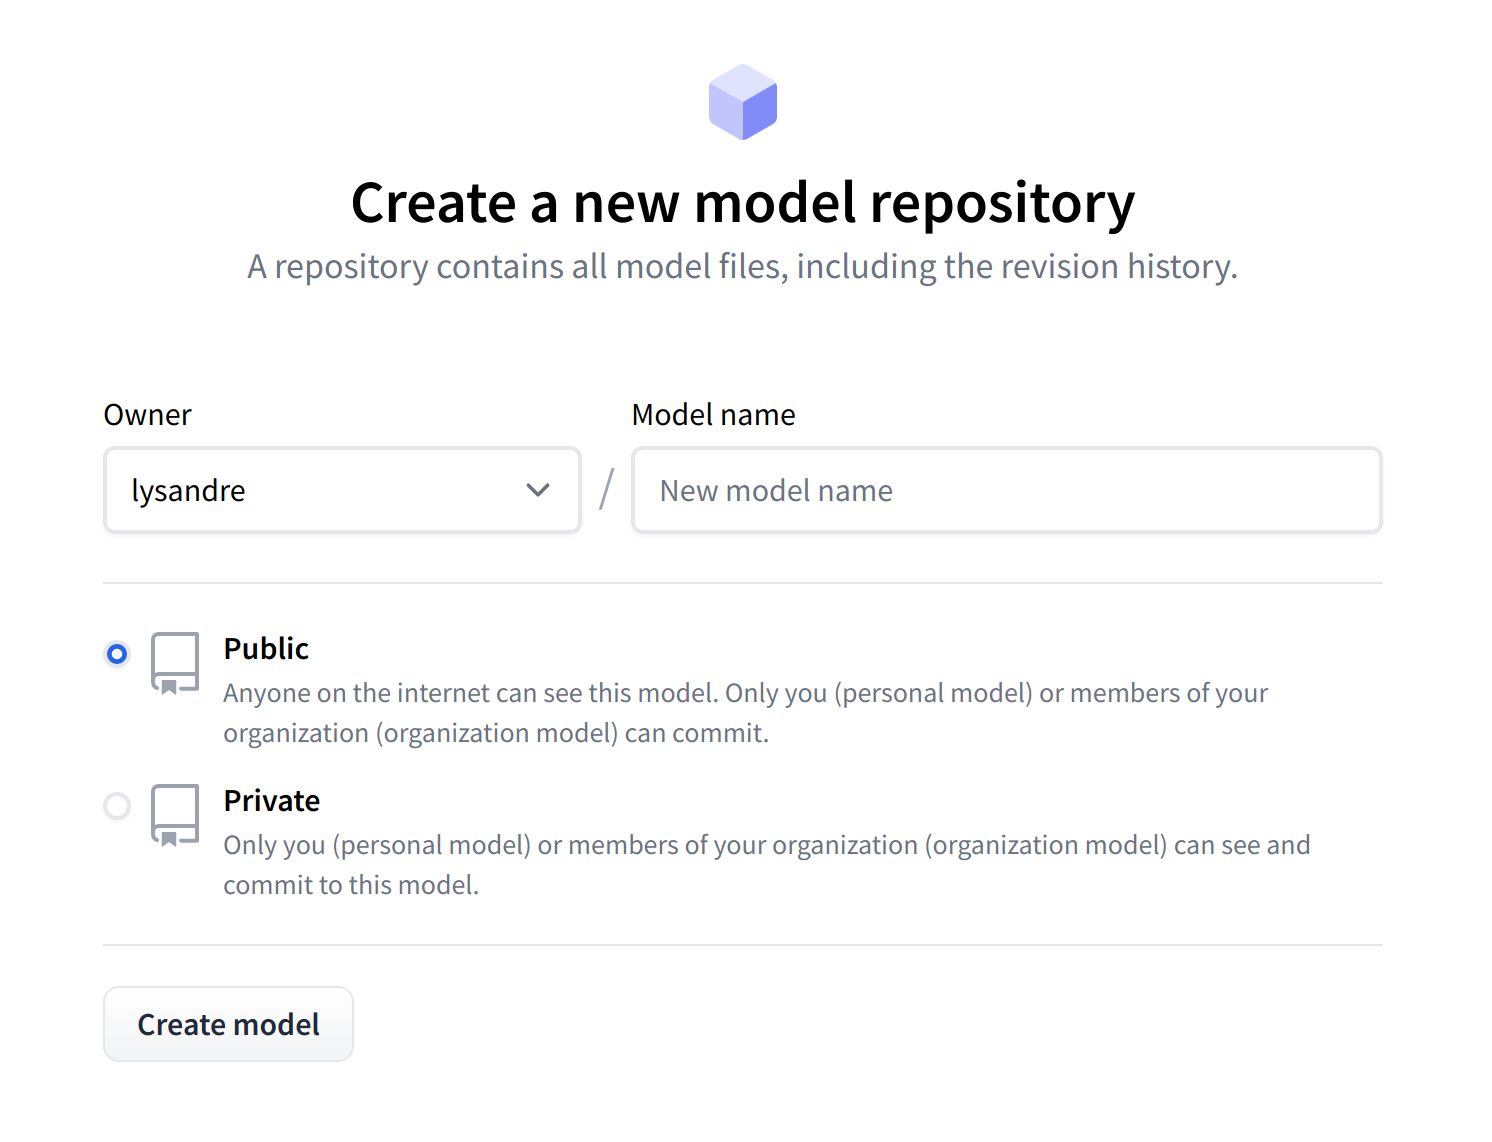 Page showcasing the model used for the creation of a new model repository.